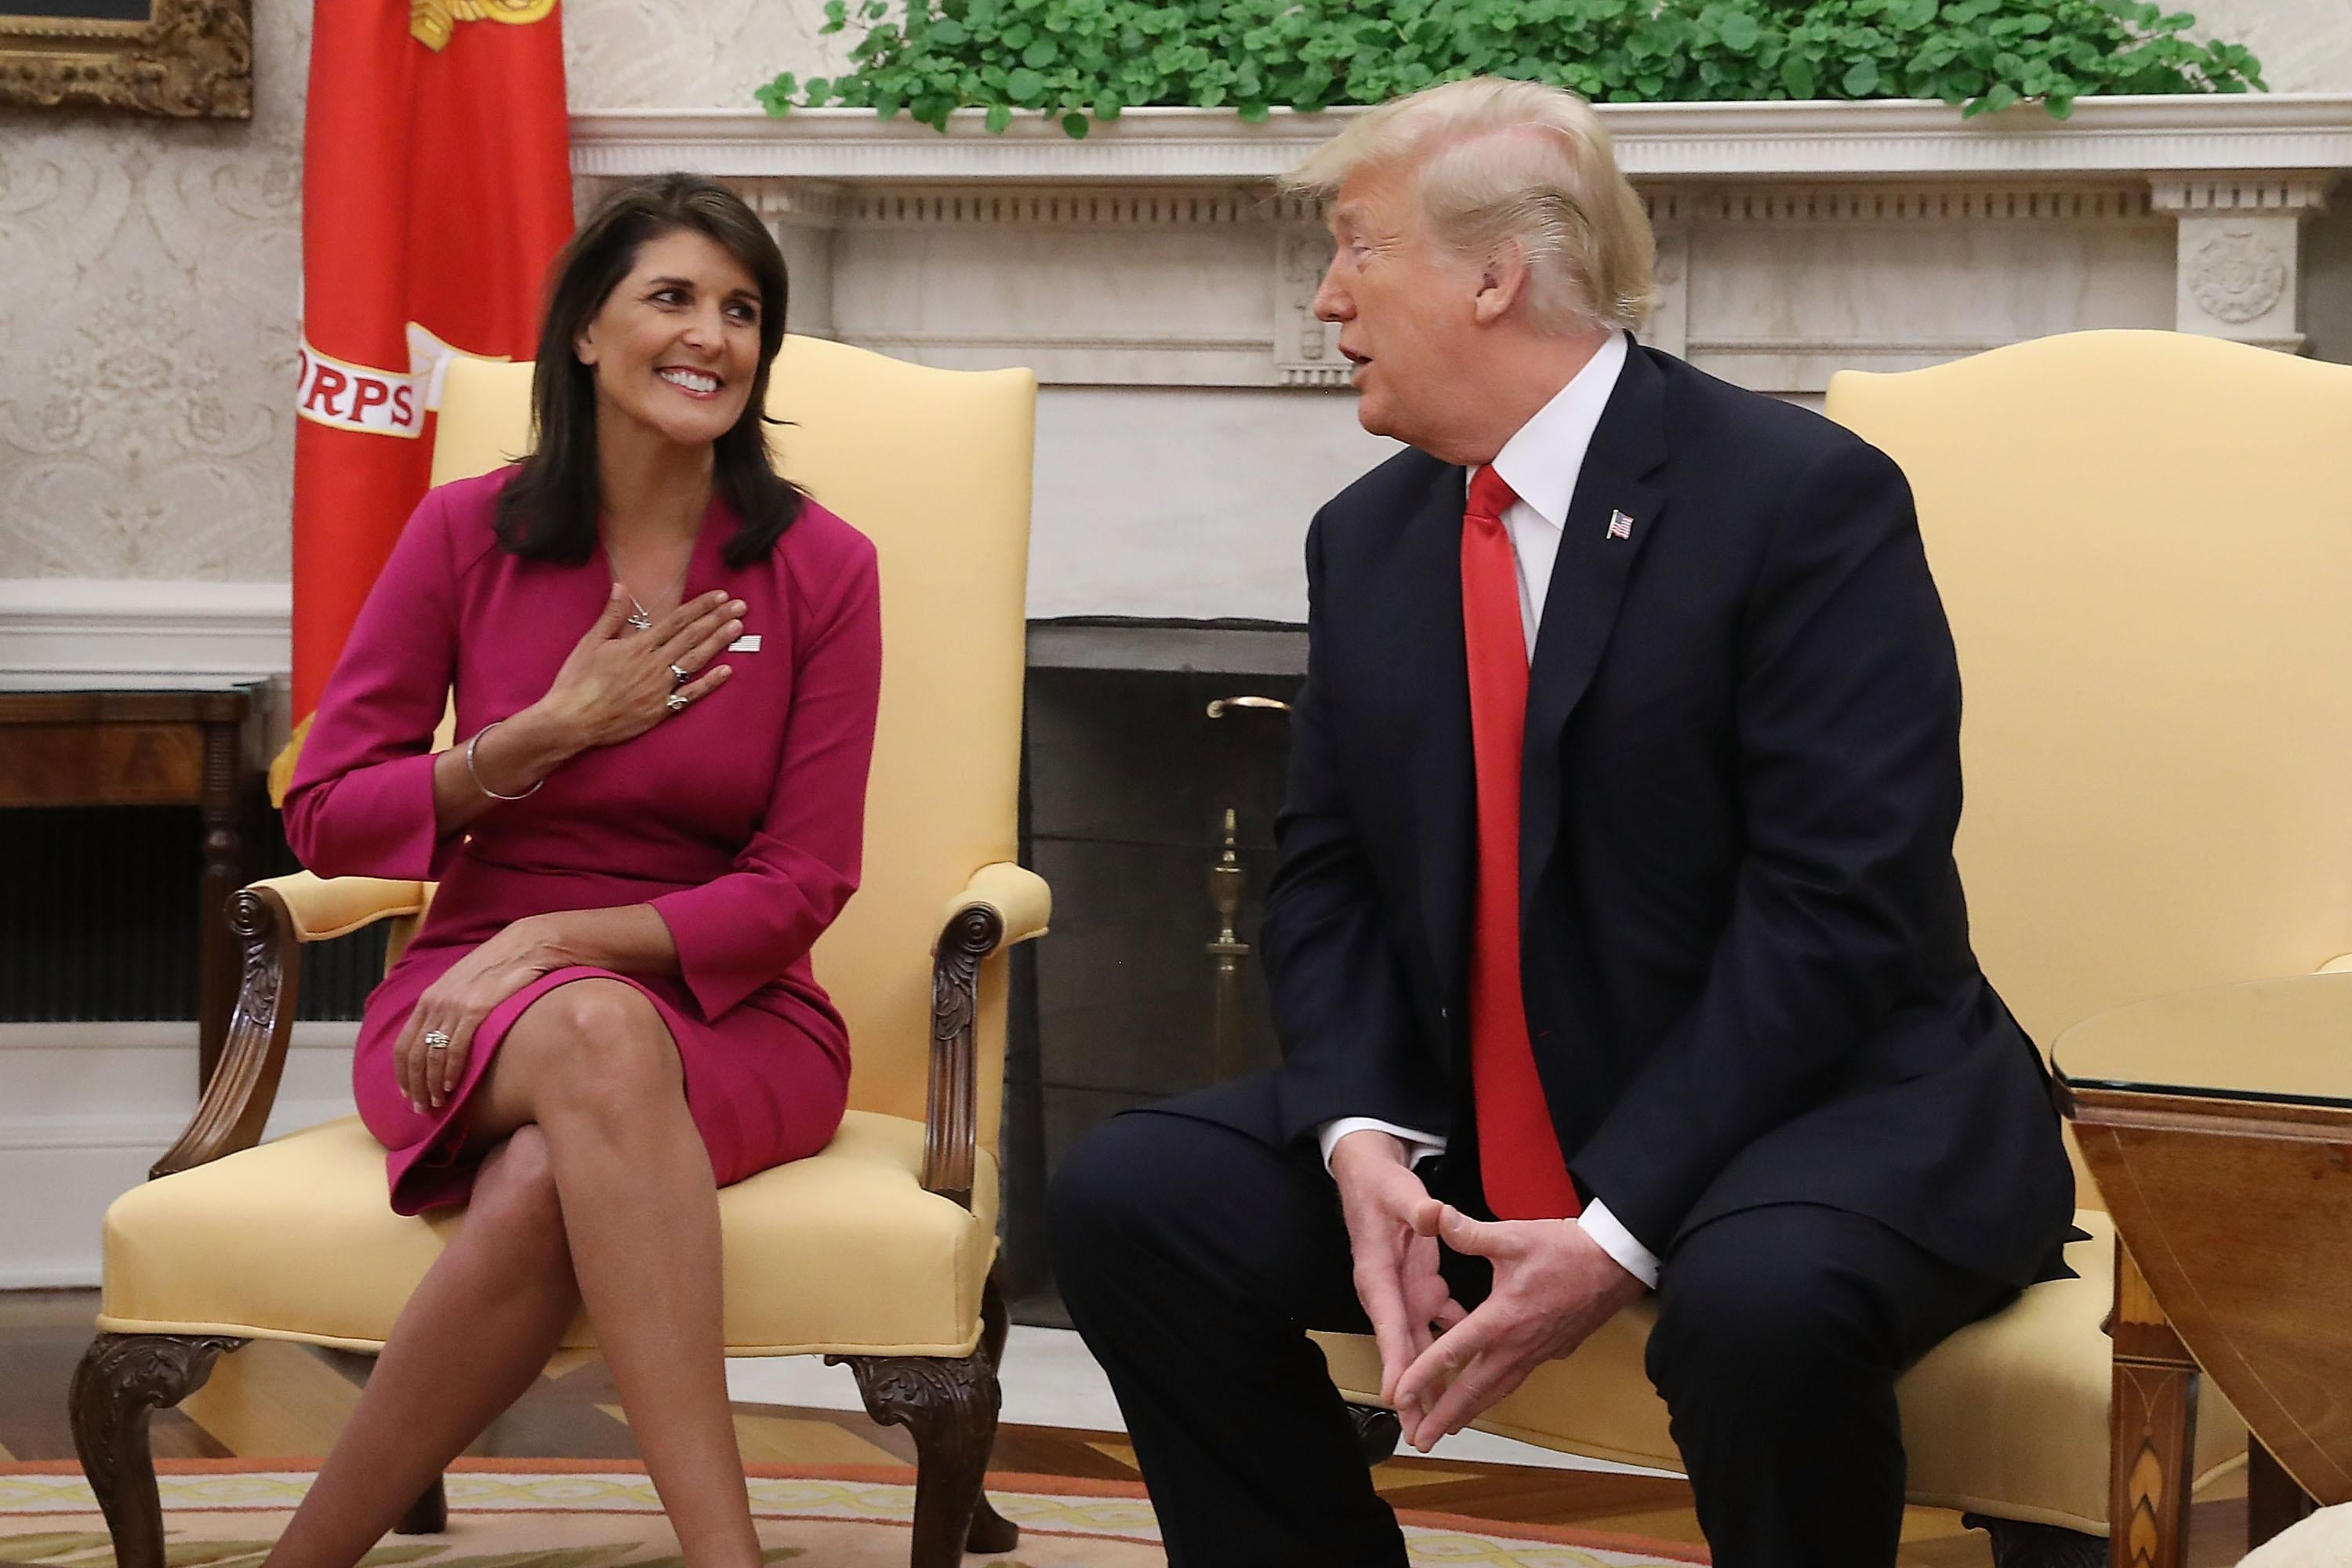 President Donald Trump sits next to Nikki Haley in the Oval Office.